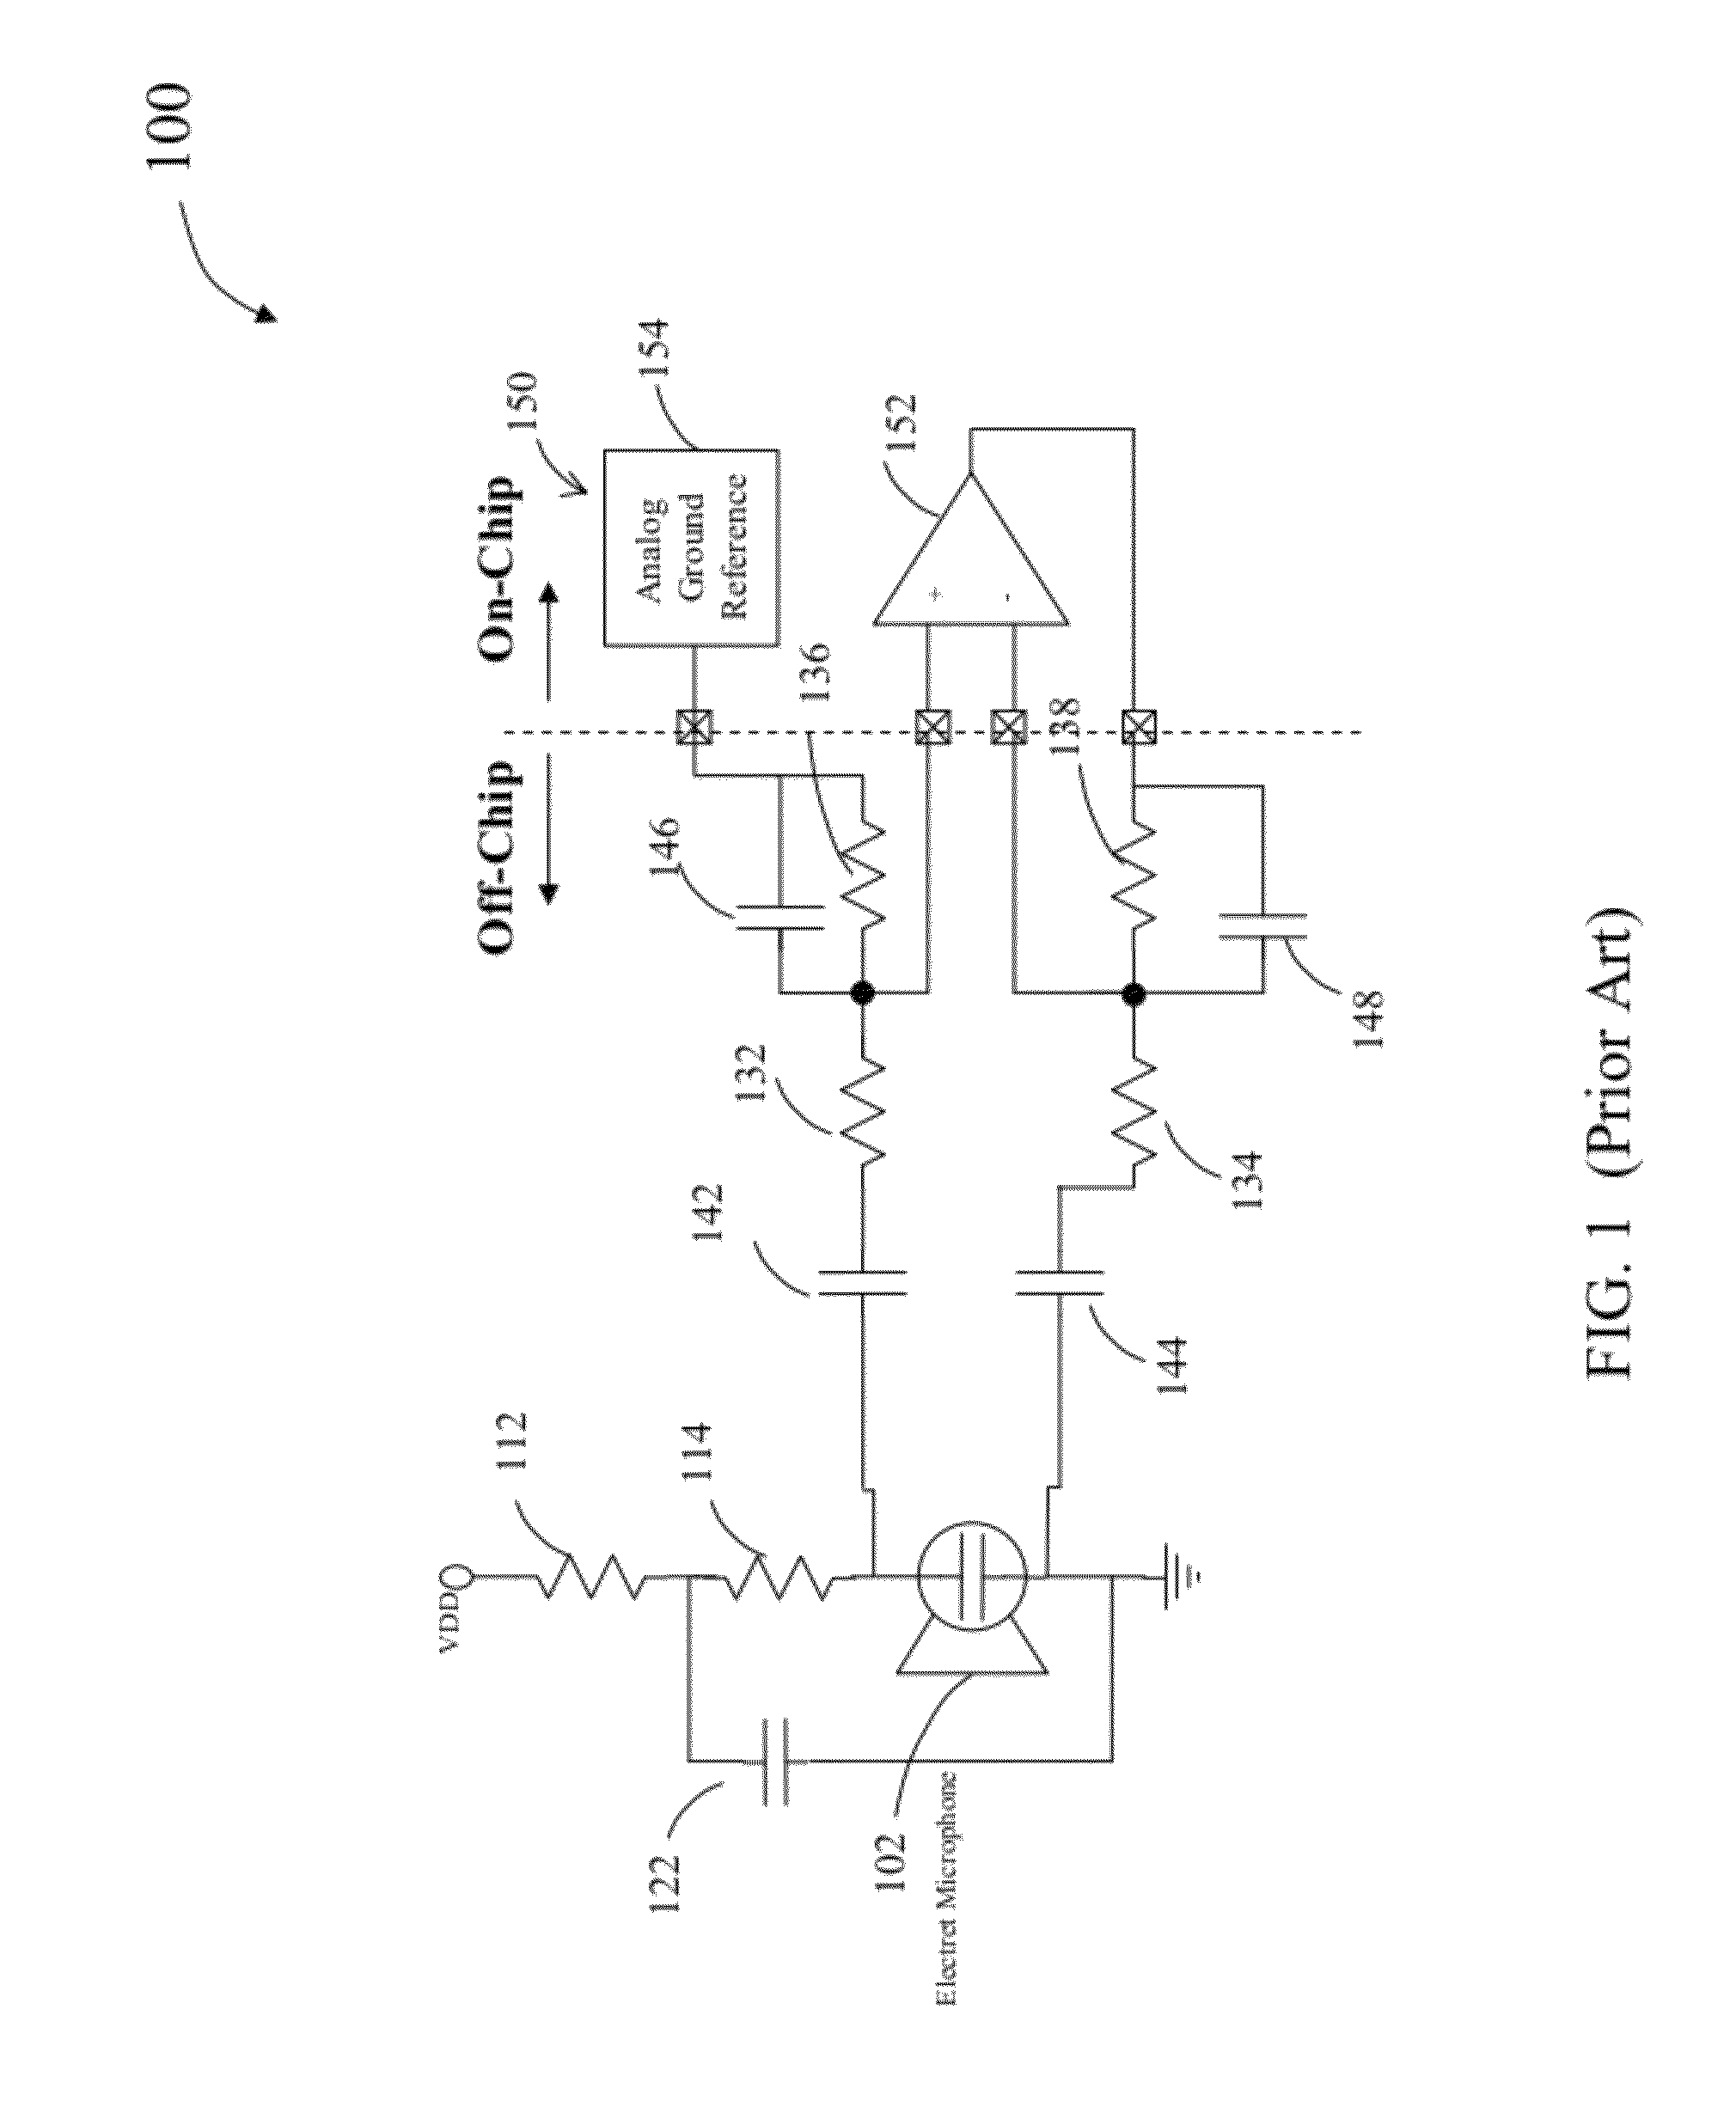 Programmable integrated microphone interface circuit